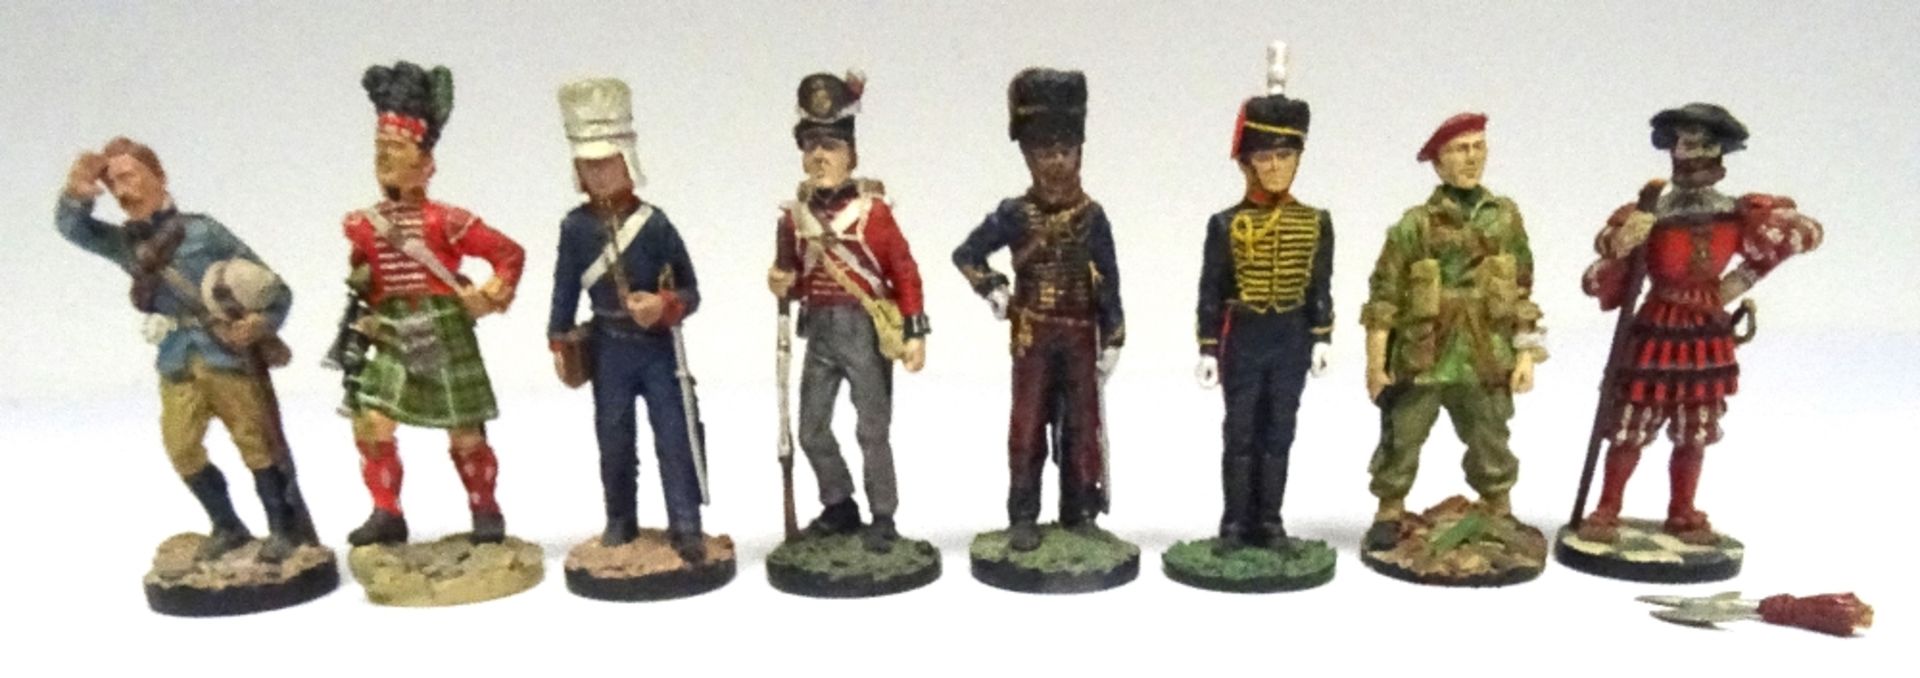 Franklin Mint The Fighting Men of the British Empire - Image 2 of 7